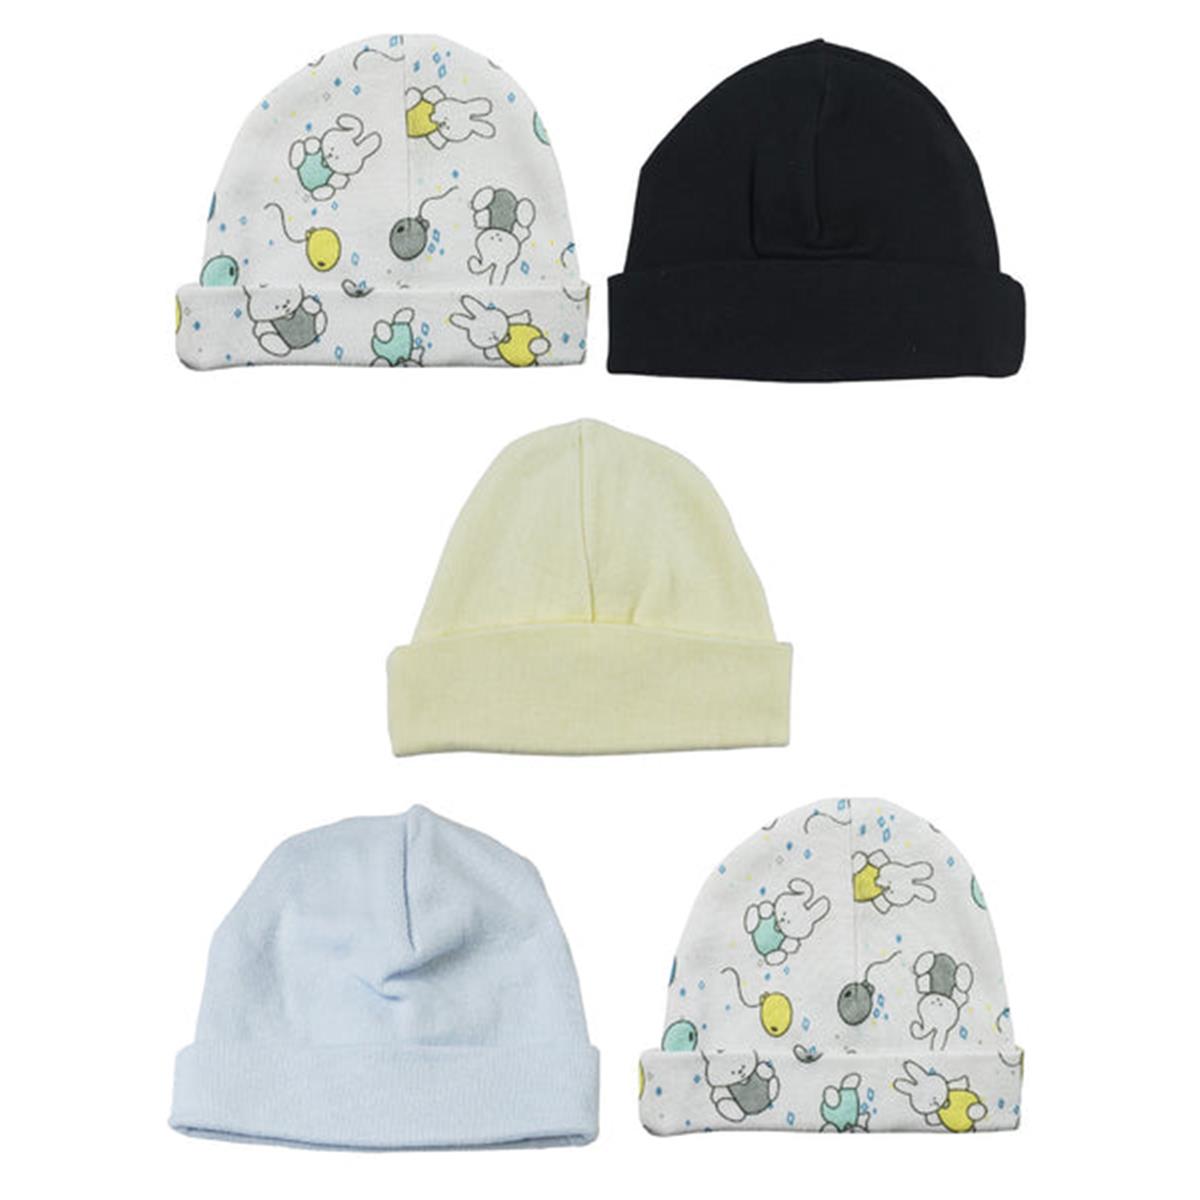 Picture of Bambini LS-0510 Boys Baby Caps - Blue&#44; Black&#44; Yellow & Print - One Size - 5 per Pack